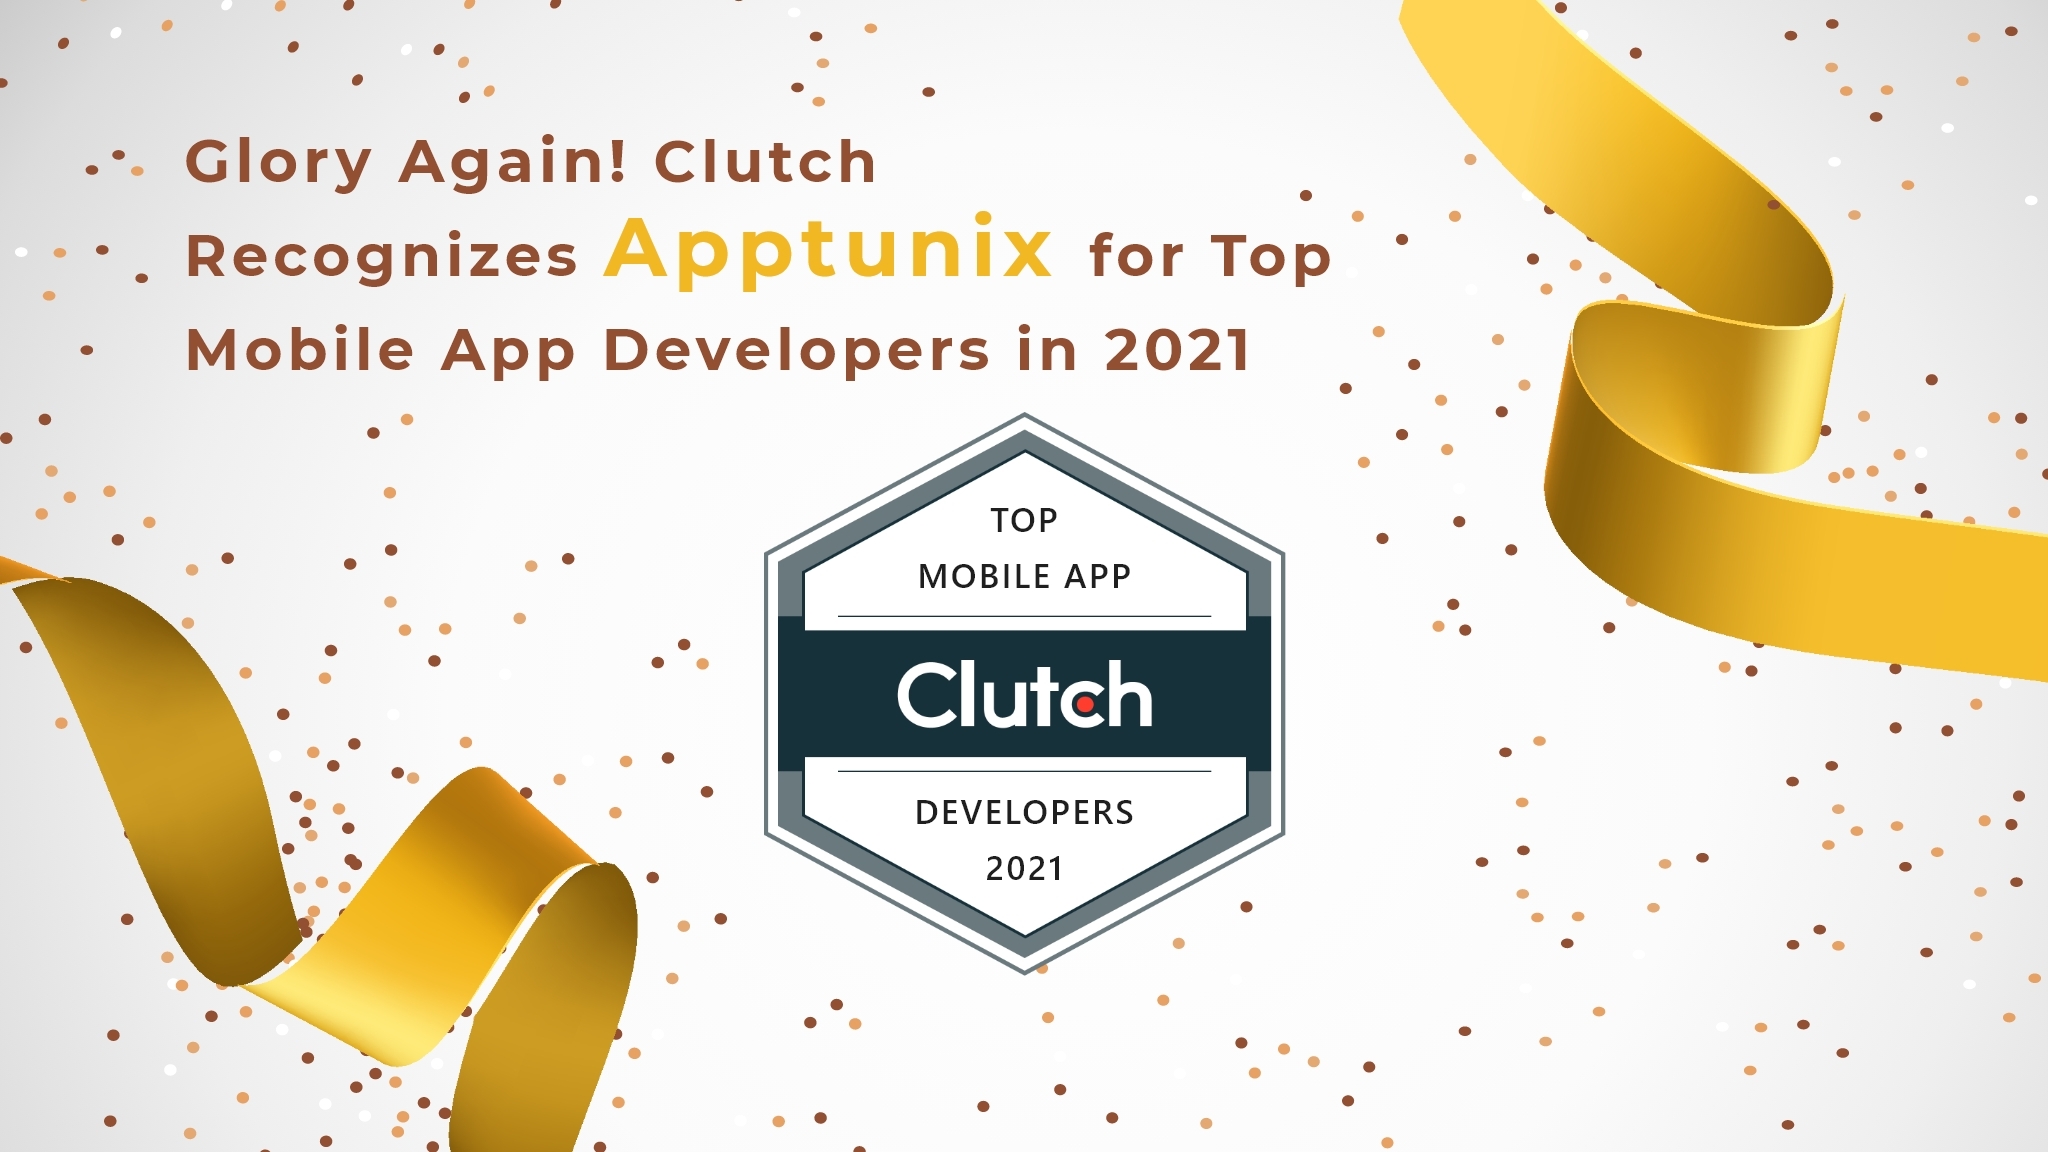 Glory Again! Clutch Recognizes Apptunix for Top Mobile App Developers in 2021